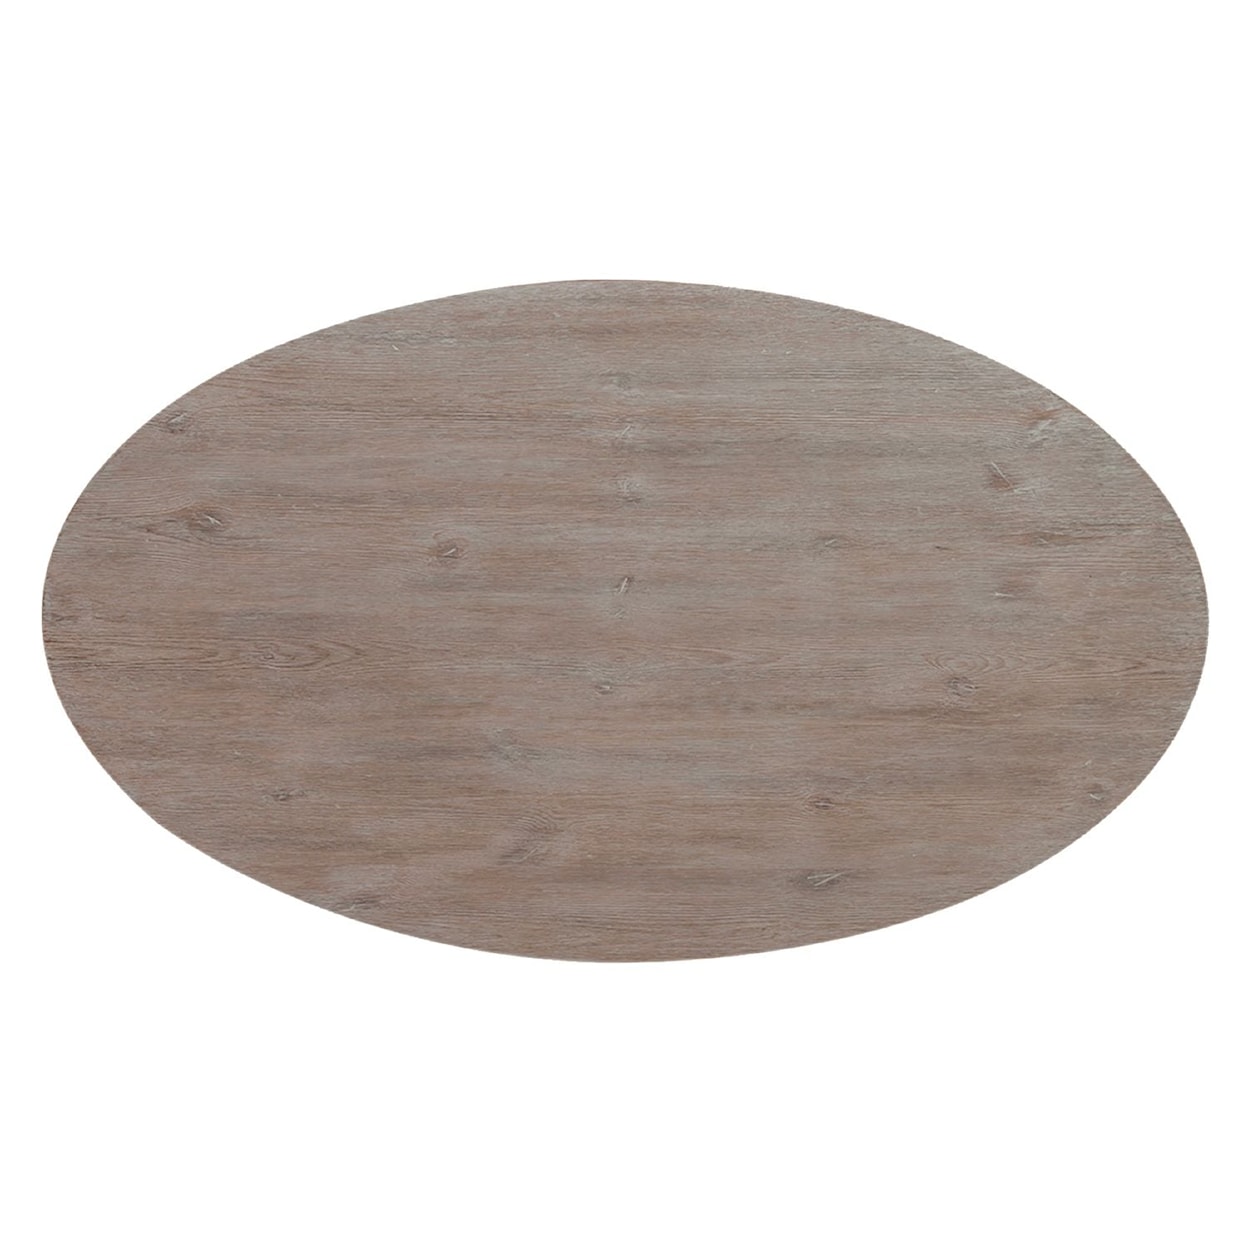 Libby Greystone Mill Oval Cocktail Table